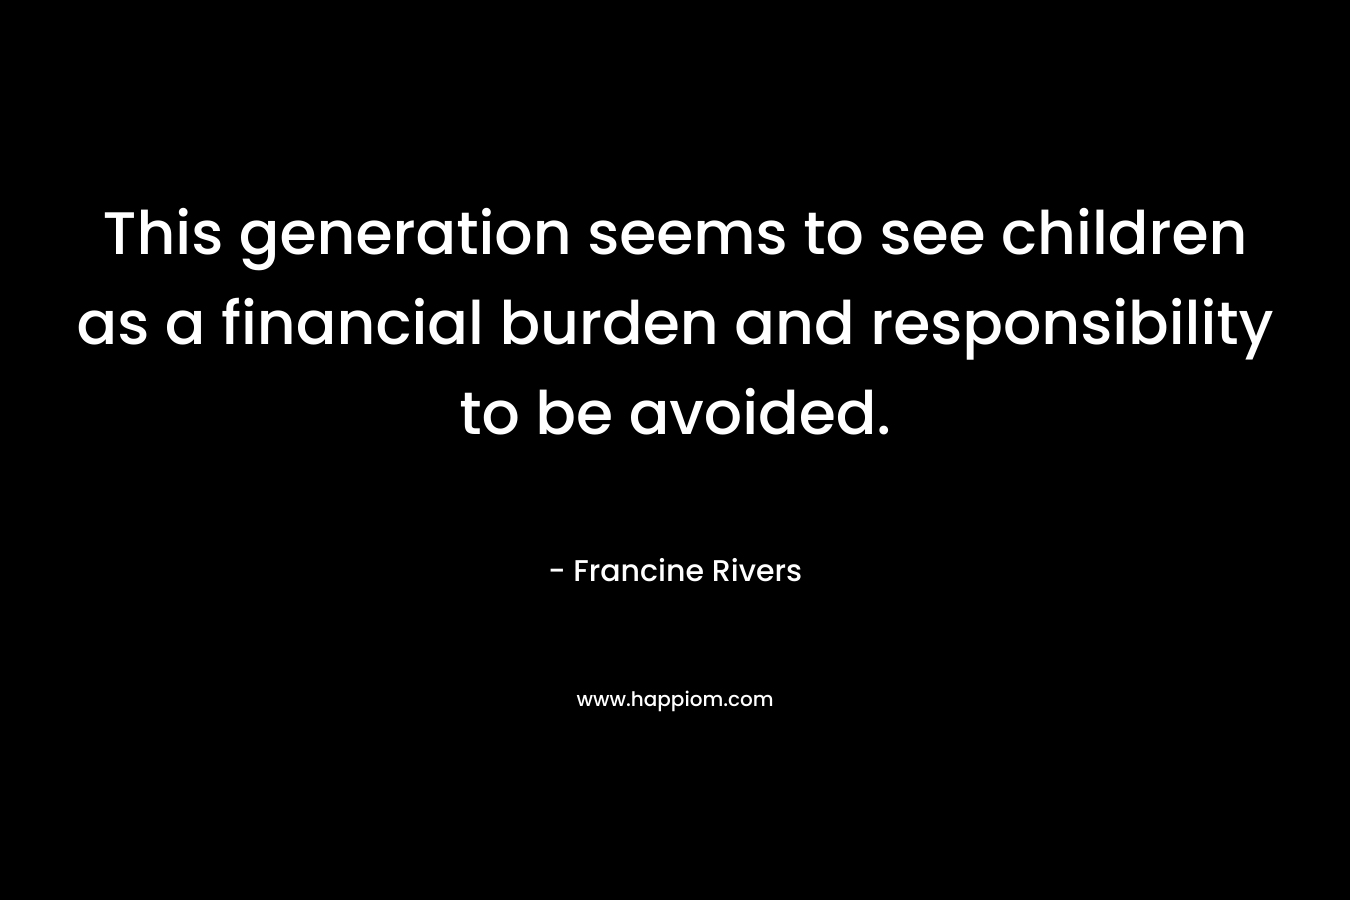 This generation seems to see children as a financial burden and responsibility to be avoided.